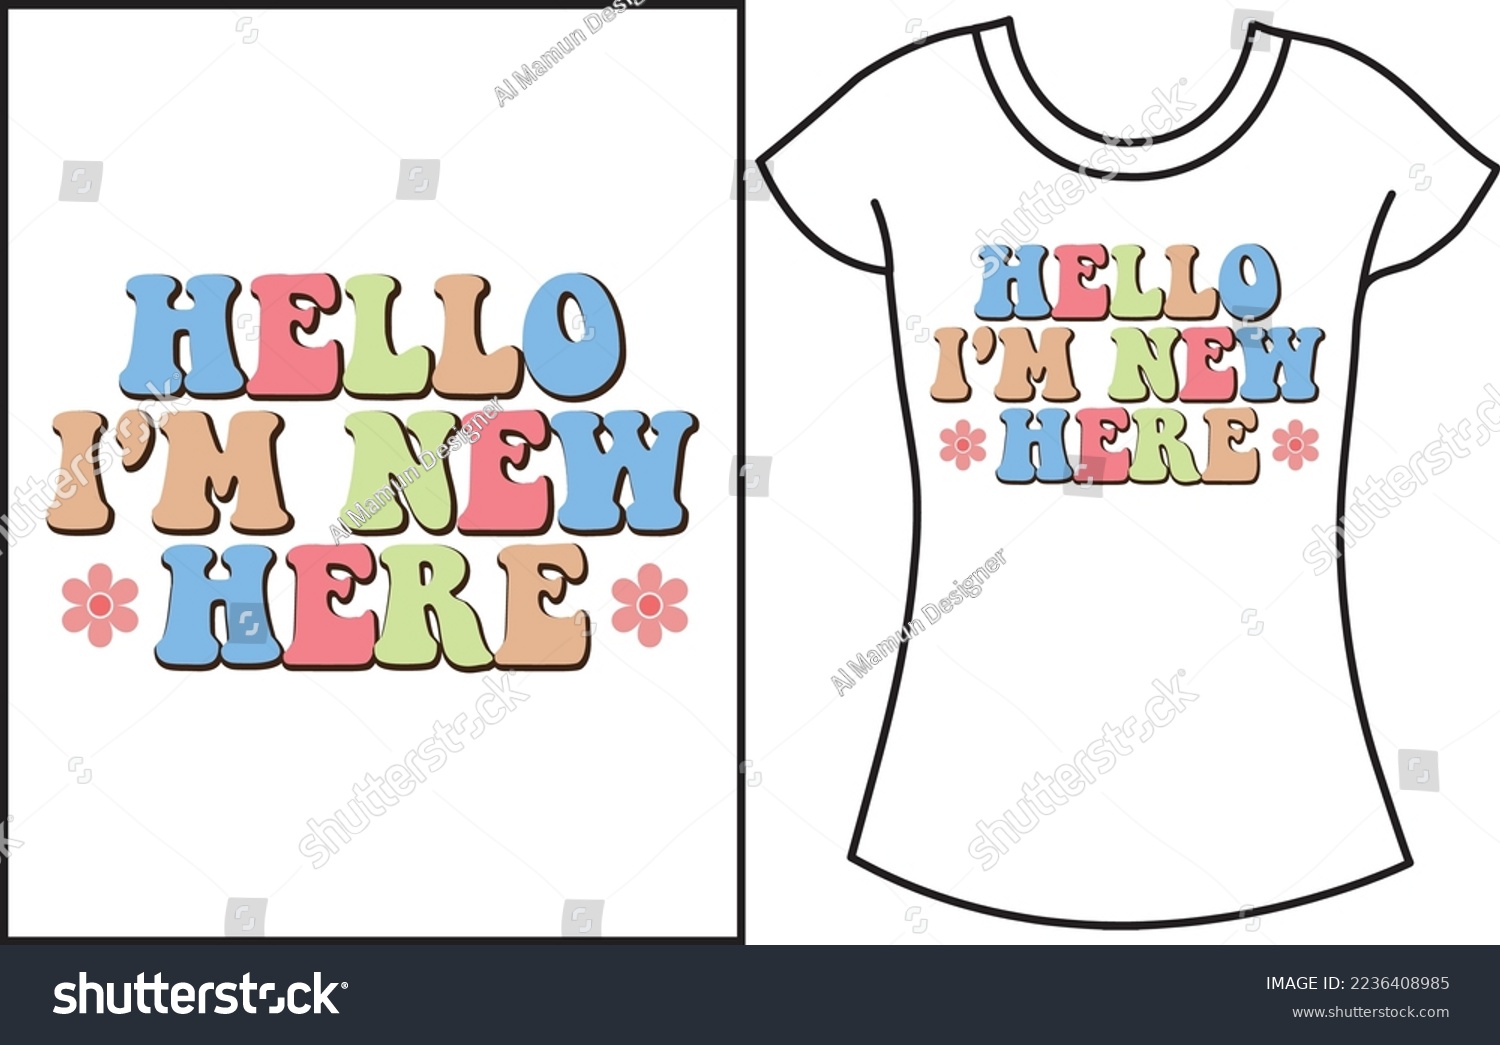 SVG of Hello, I'm new here. Baby saying SVG t-shirt design. Gift t-shirt for baby.  svg